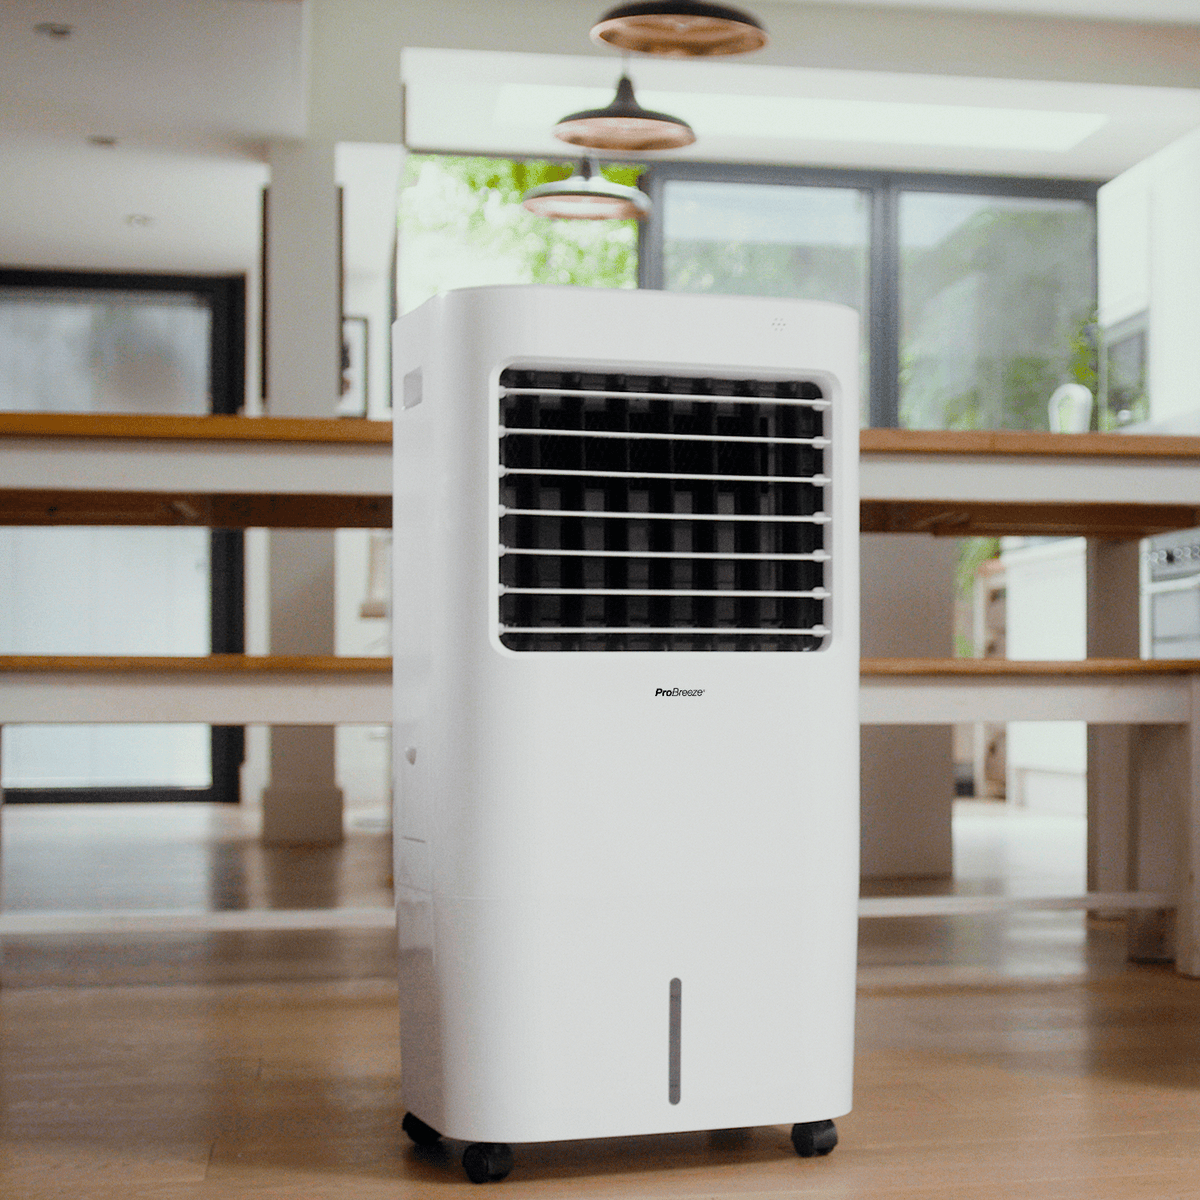 10L Portable Air Cooler with Advanced Cooling Technology - 4 Operating Modes